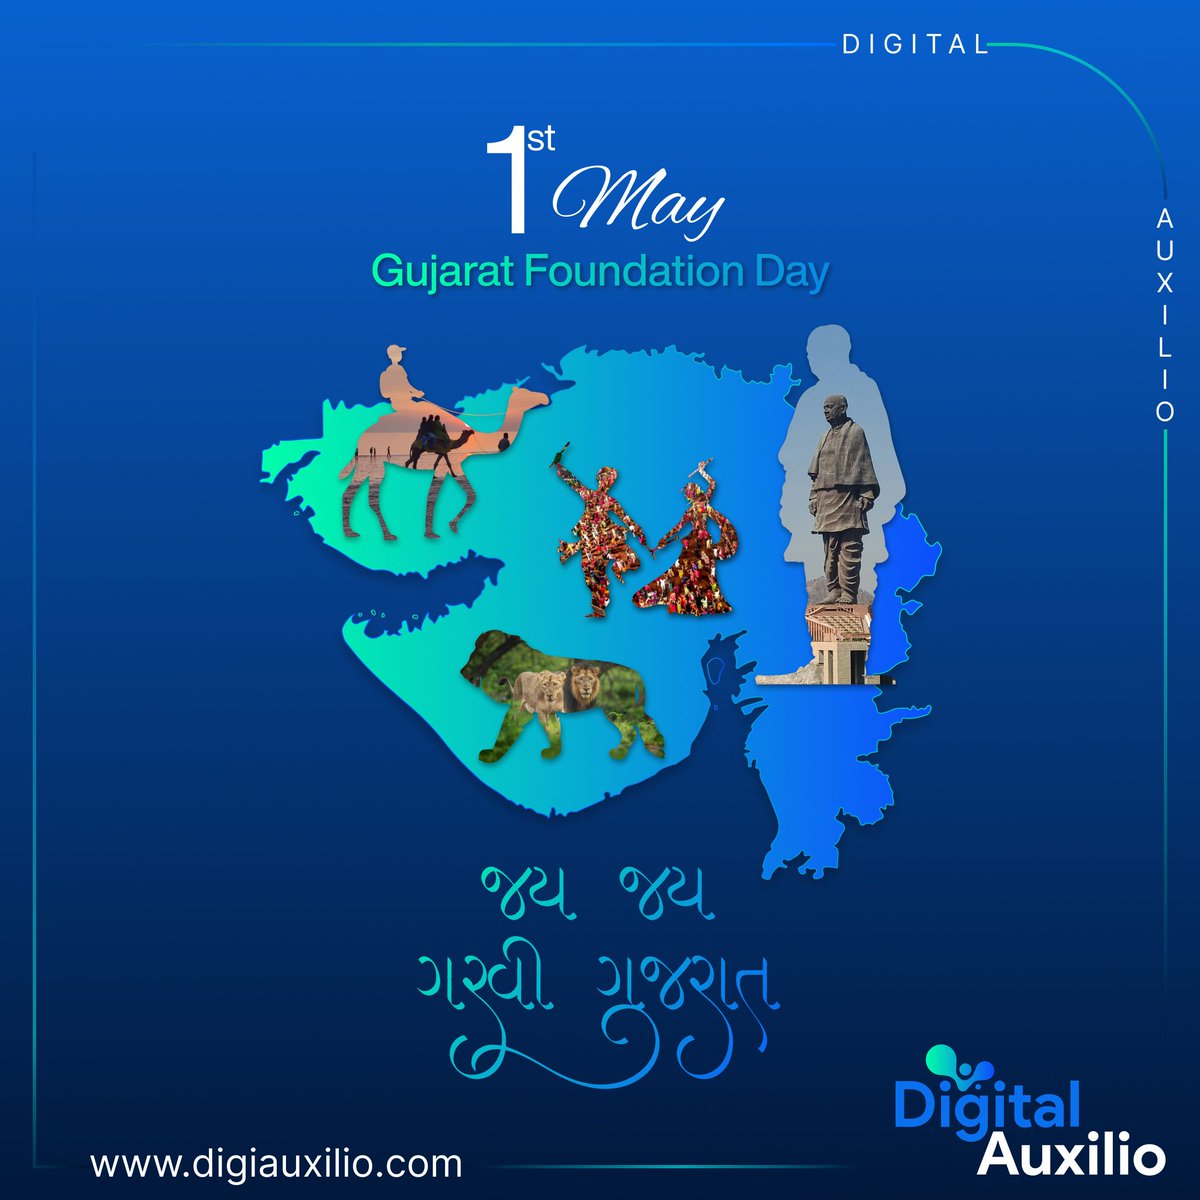 Wishing all our fellow Gujaratis a joyful and prosperous #GujaratFoundationDay! May the spirit of unity and progress continue to guide us towards a brighter future. 

#gujratfoundationday #garvigujarat #gujju #gujjulove #gujrattitans #digitalauxilio